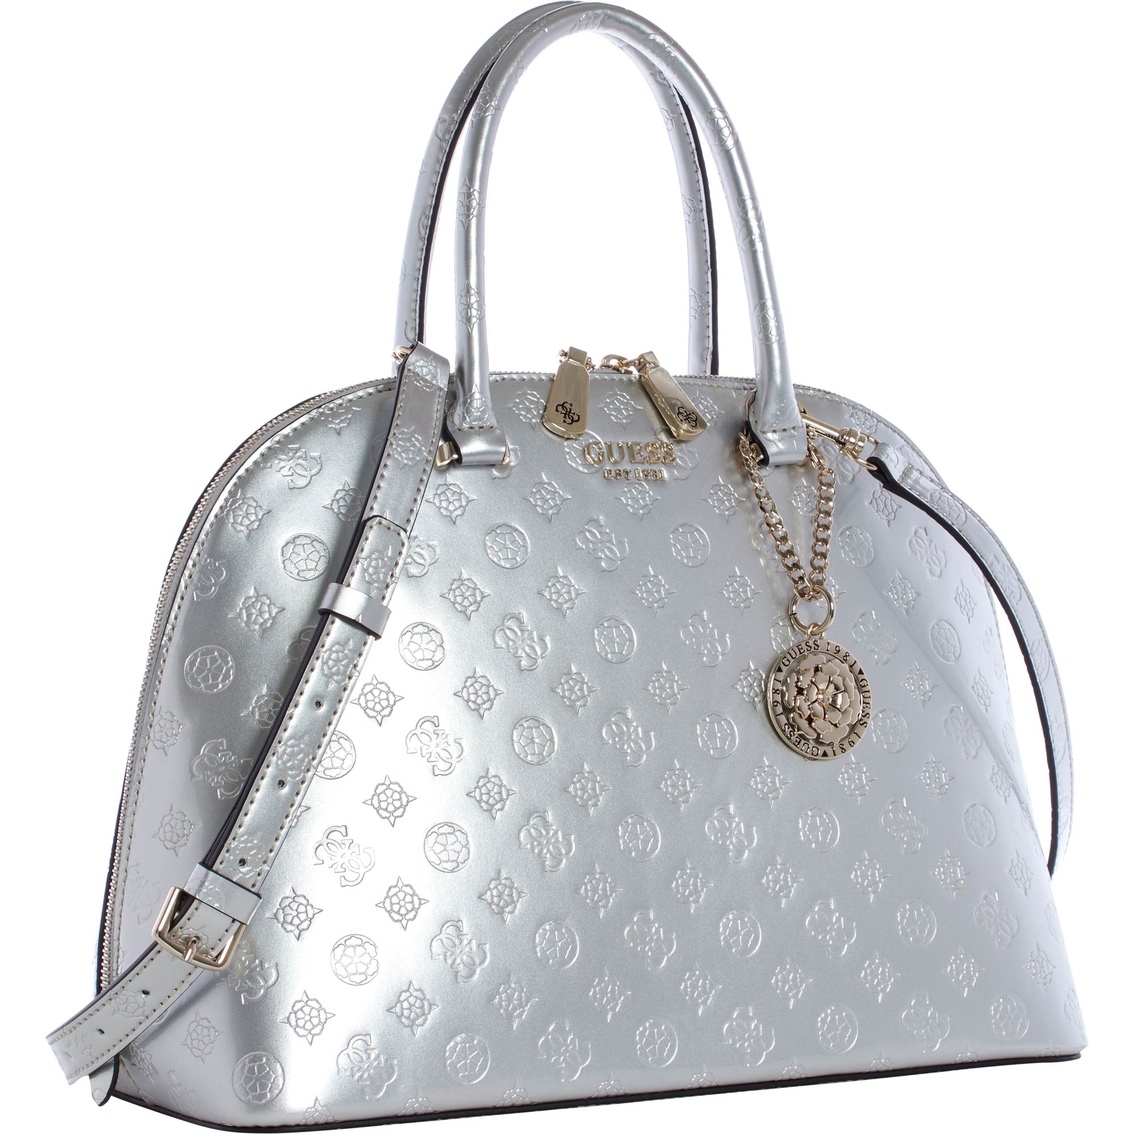 Guess Peony Dome Satchel - Image 2 of 3